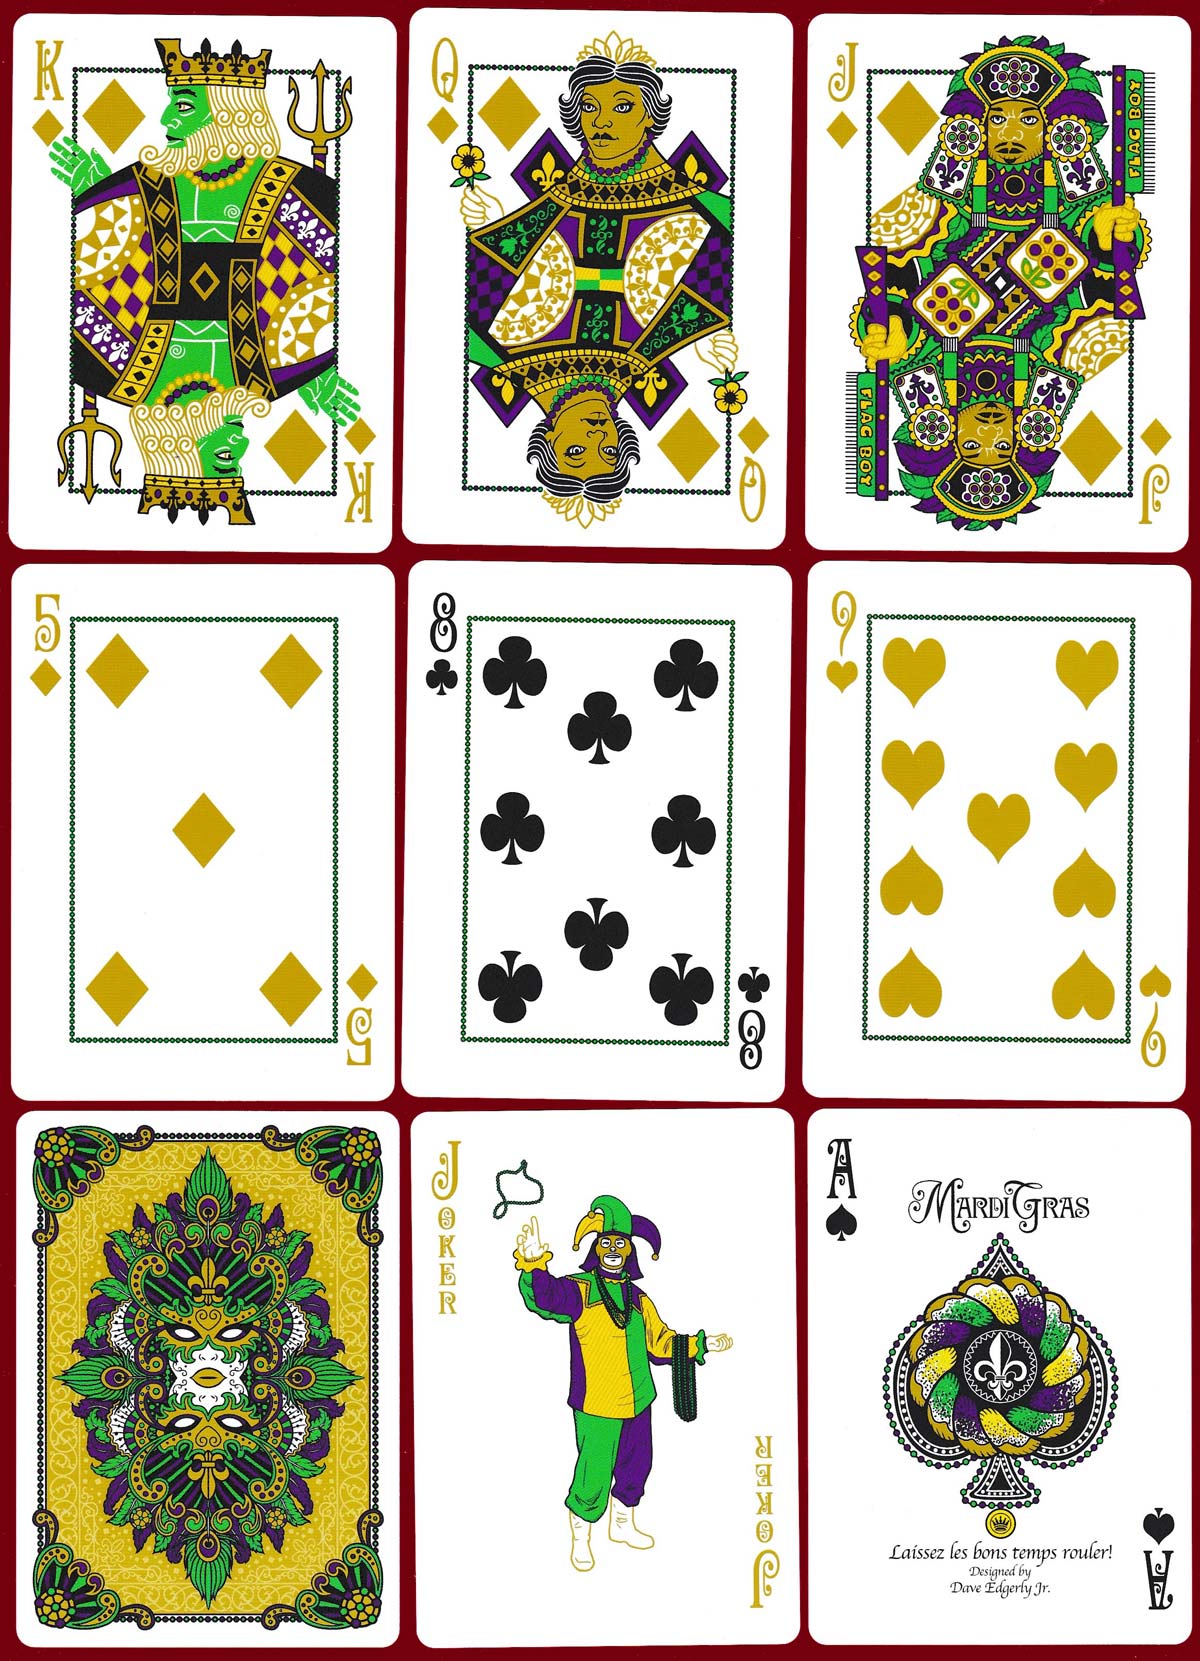 Mardi Gras playing cards — The World of Playing Cards